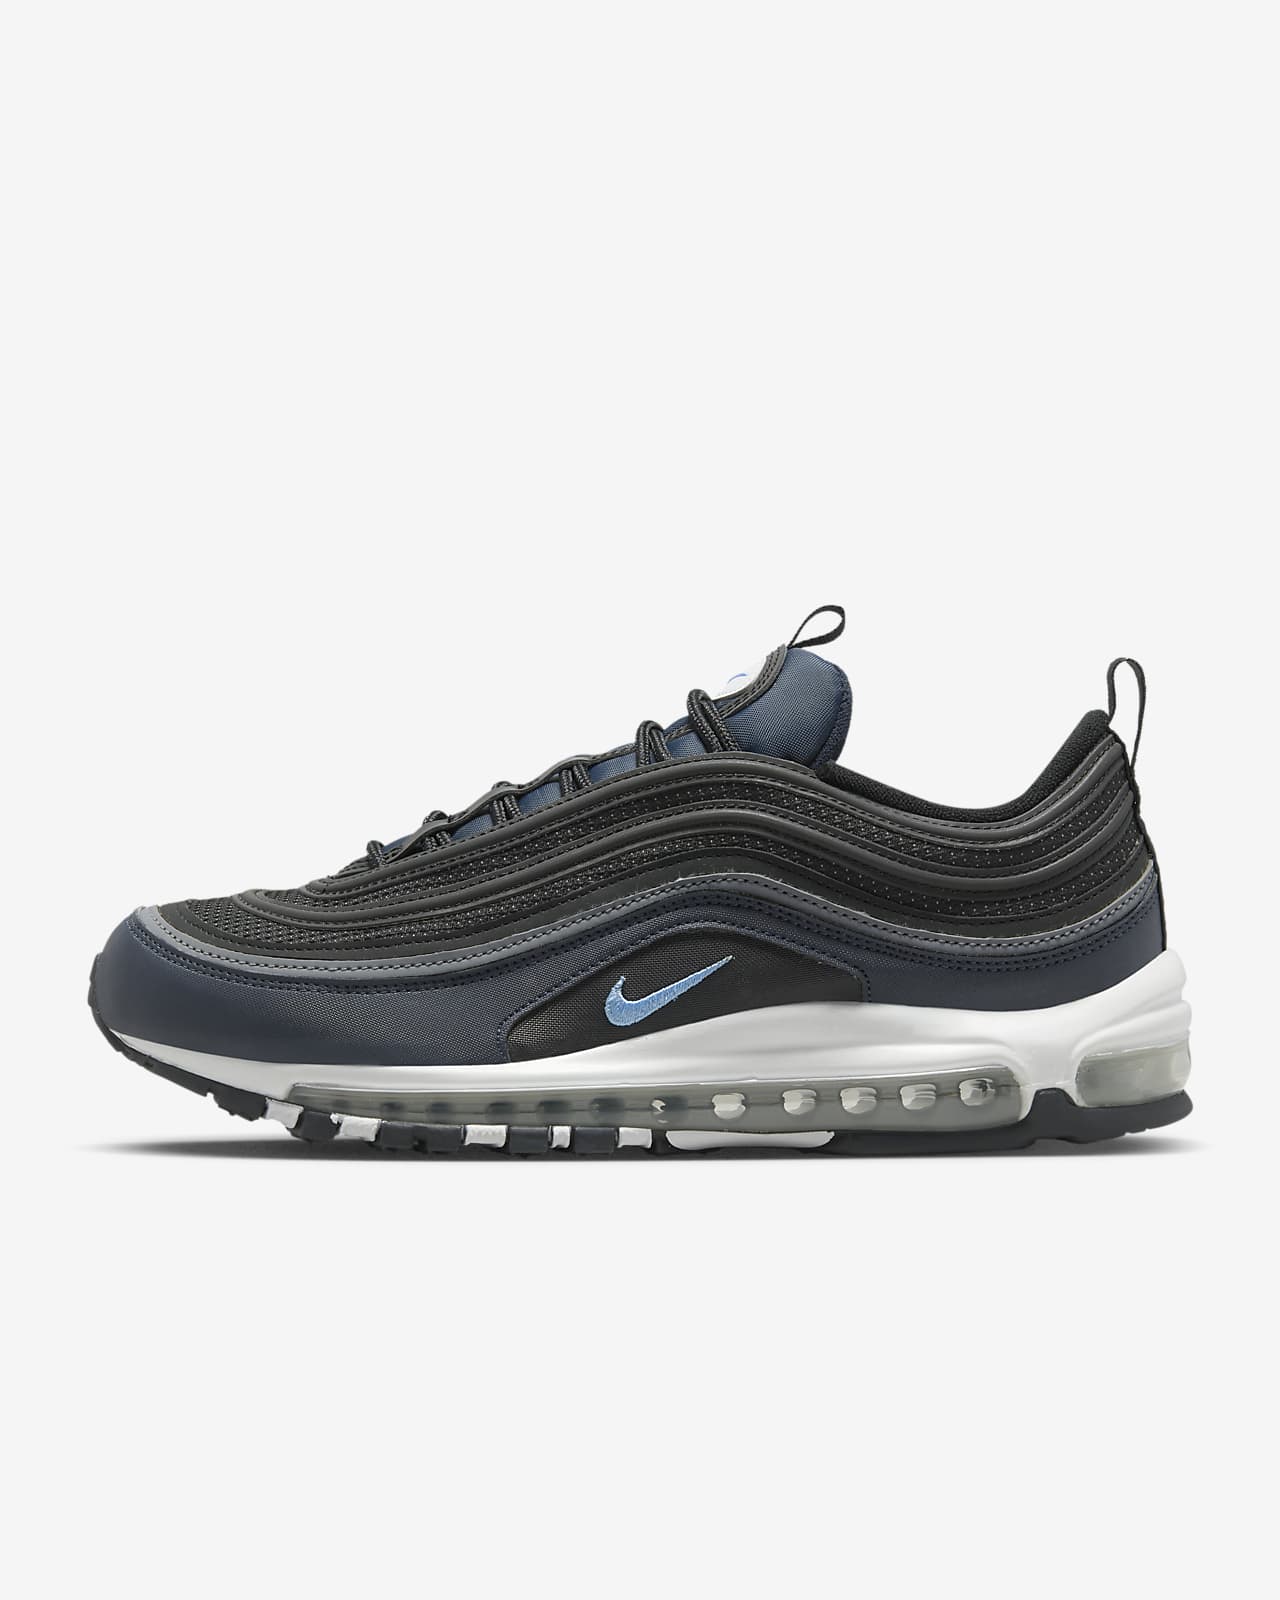 spy Objected Ithaca Nike Air Max 97 Men's Shoes. Nike.com